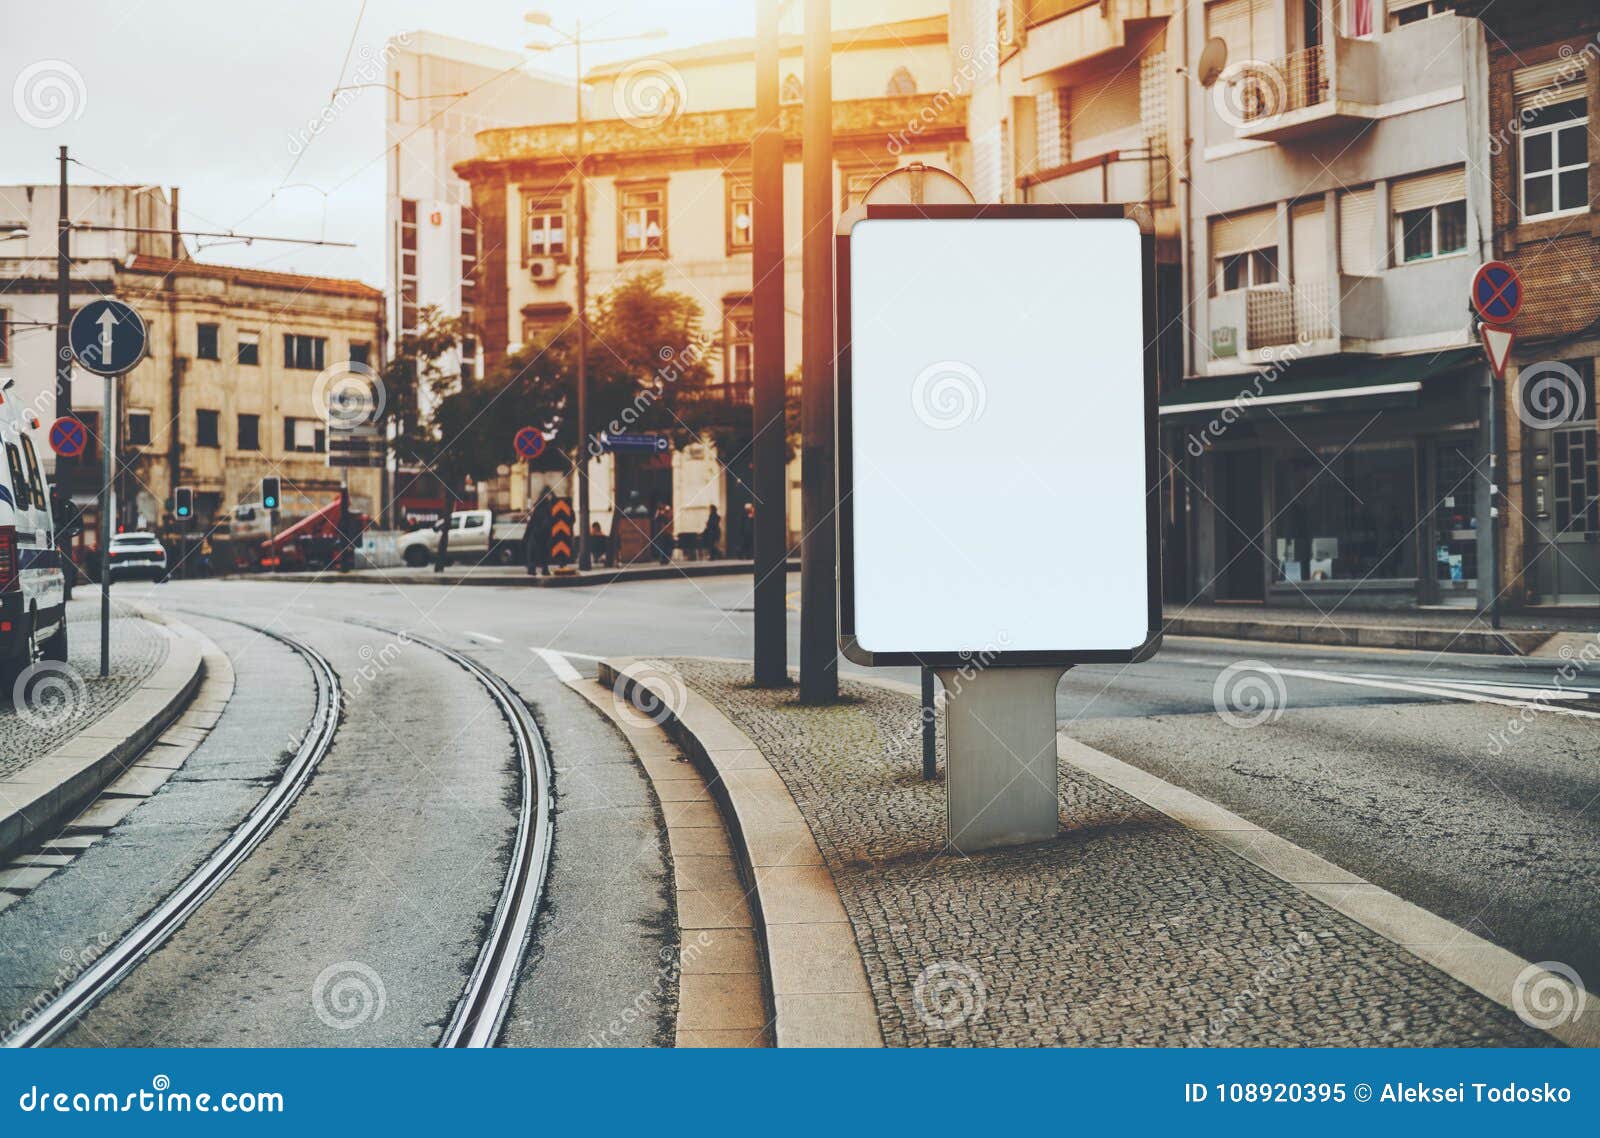 Download Banner Mock-up In Urban Settings Stock Image - Image of ...